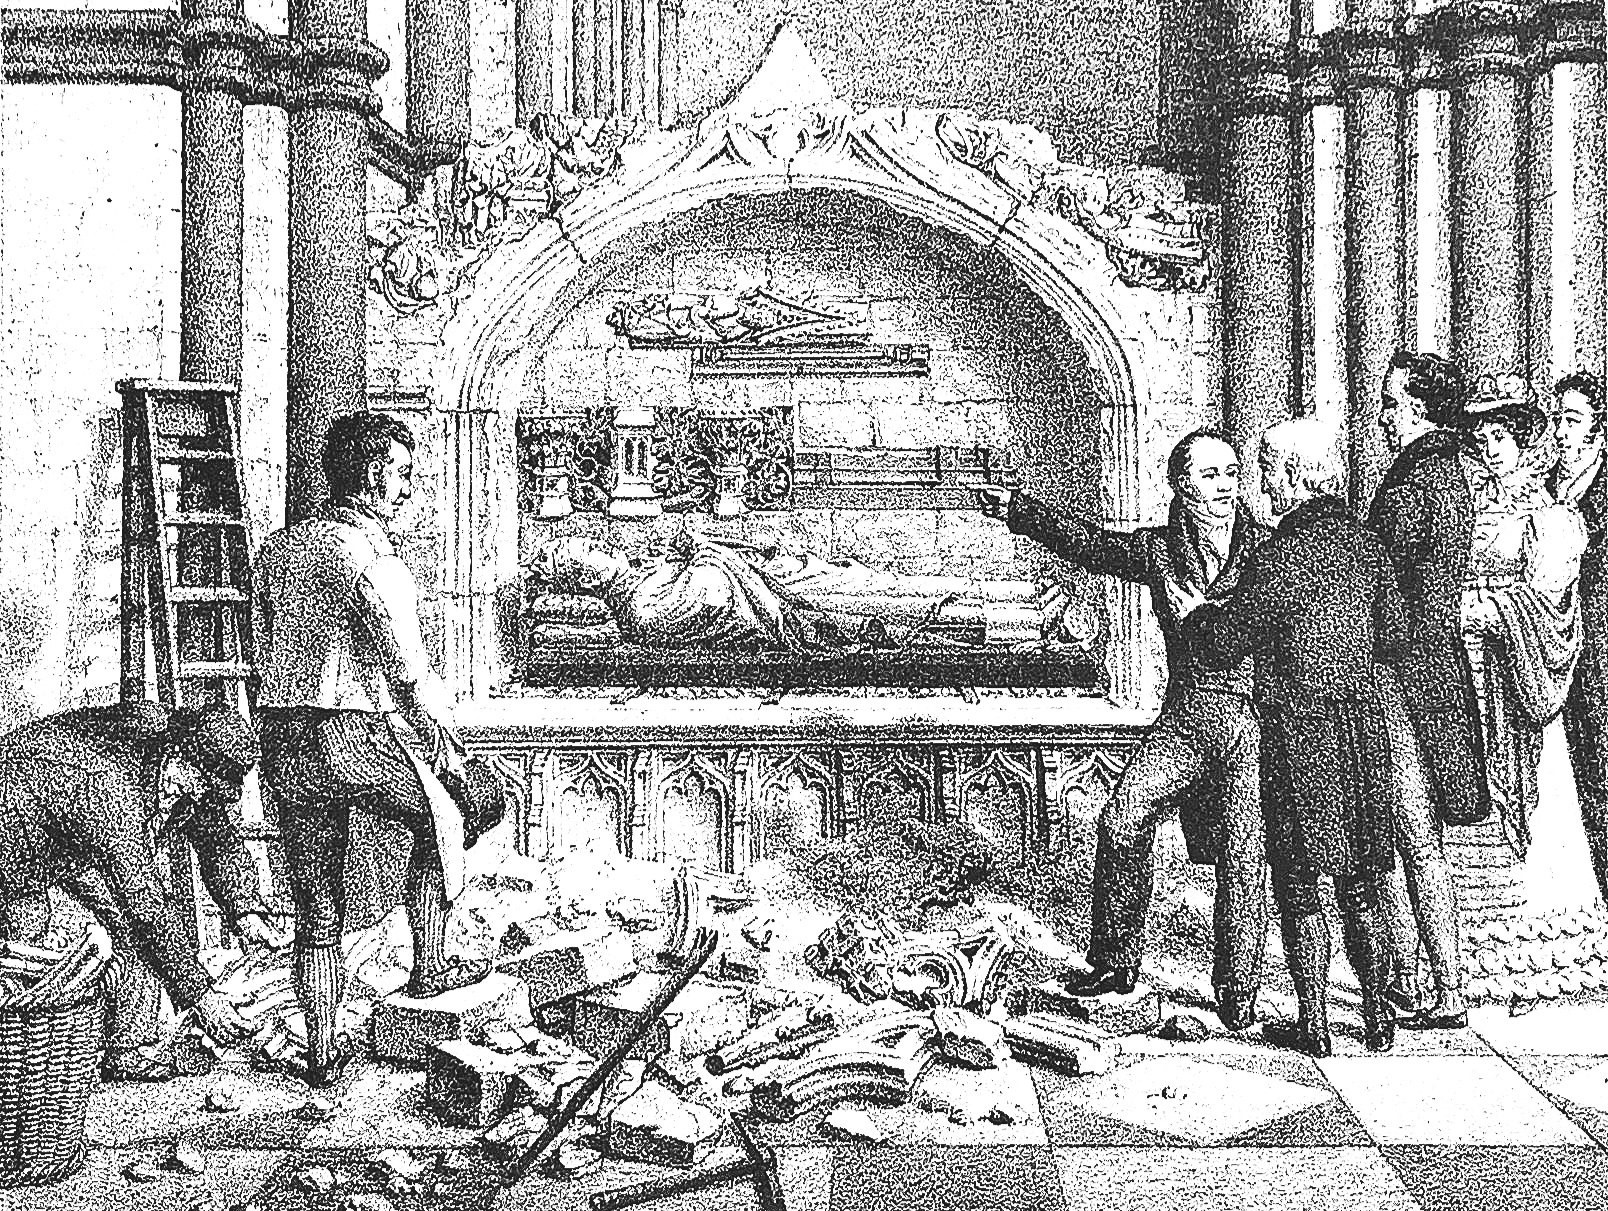 Engraving showing the 1825 discovery of the fragments from the chantry of Bishop John de Sheppey.